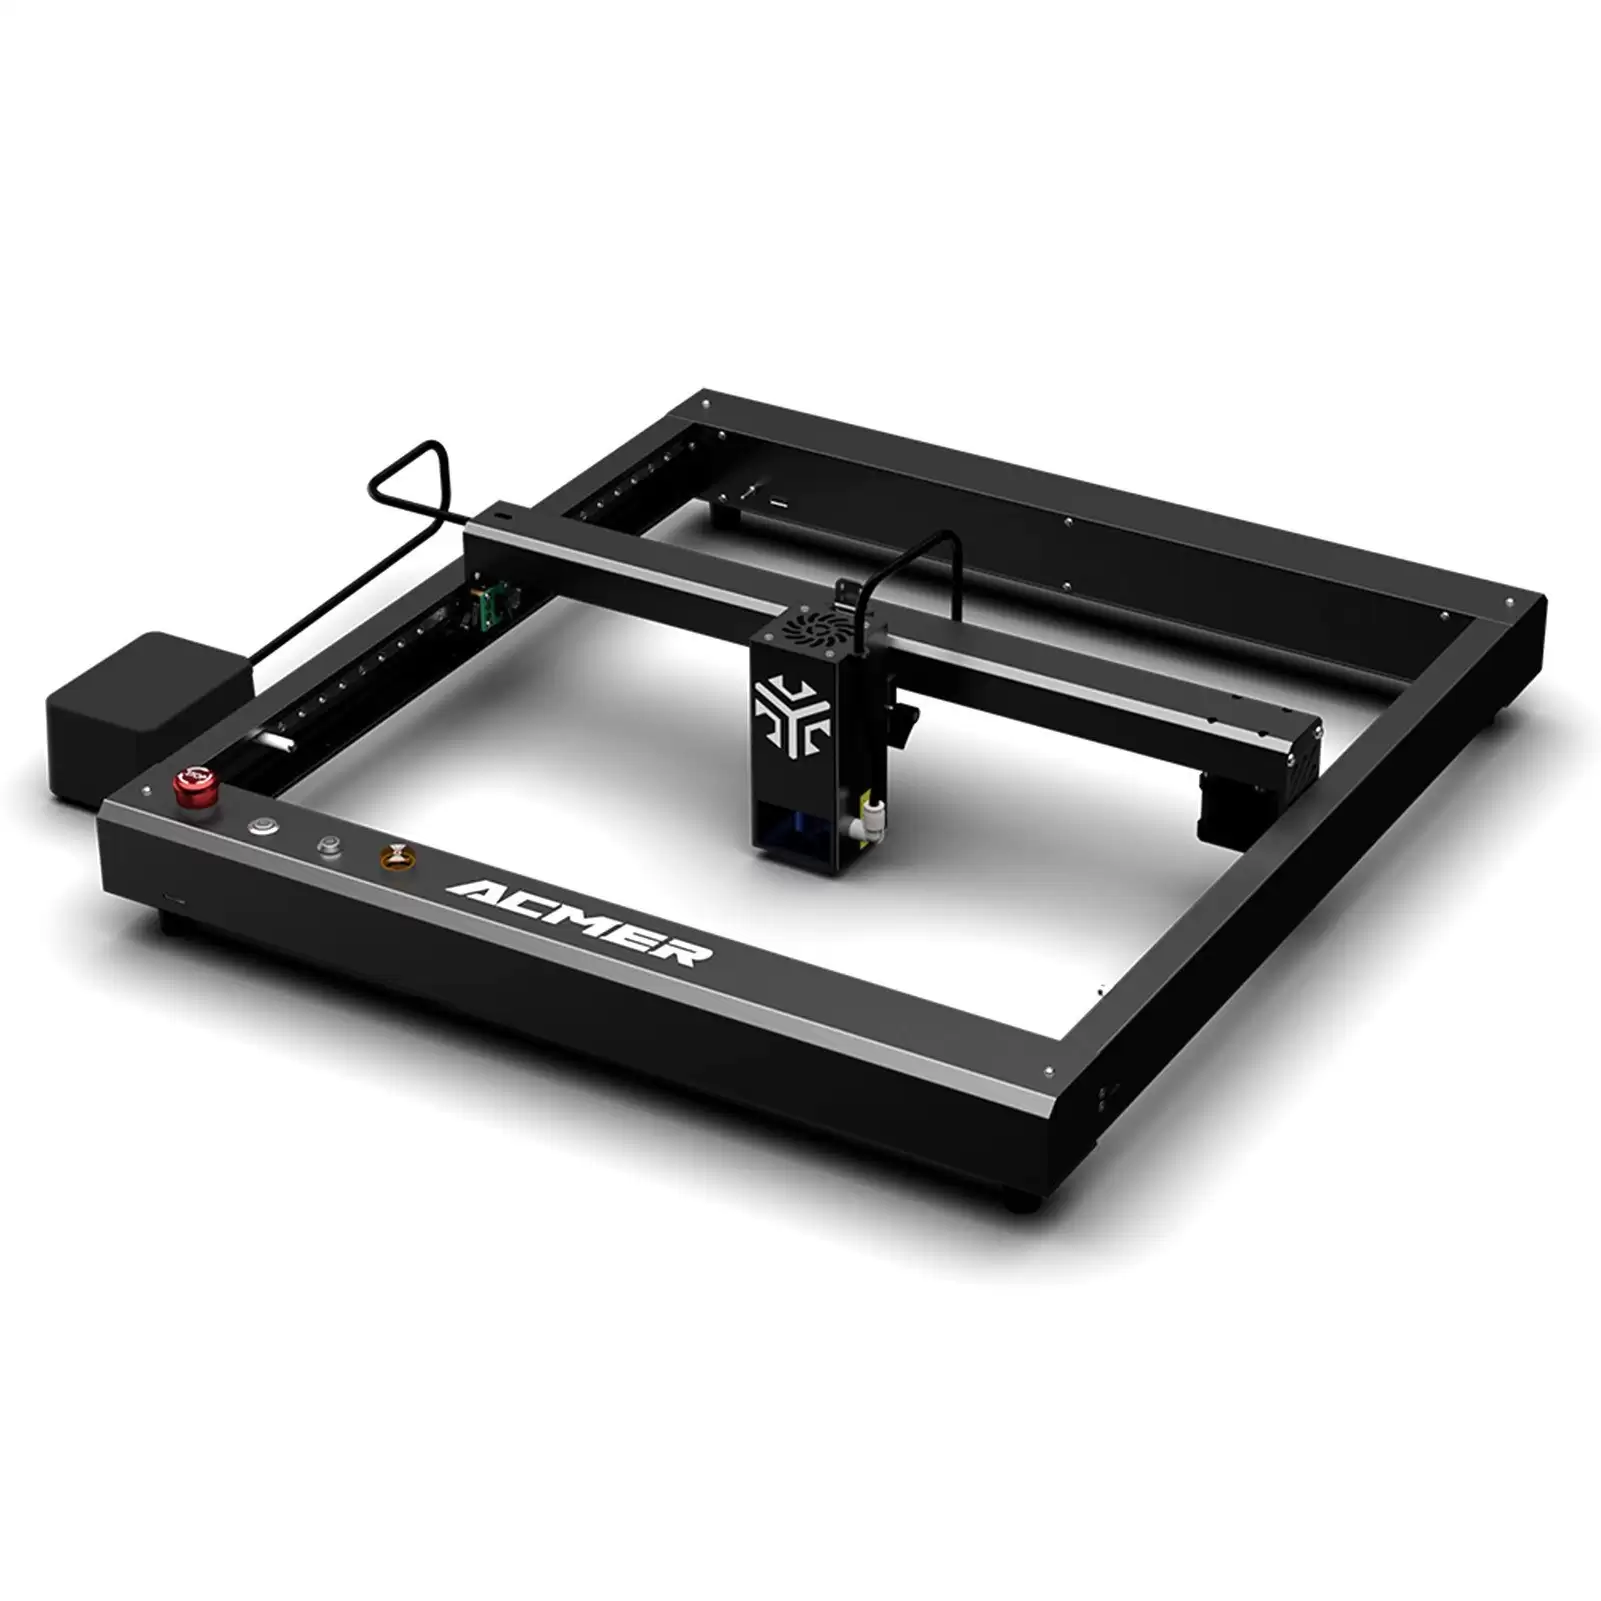 Order In Just $595 Acmer P2 22w Laser Engraver With Automatic Air-Assist System At Tomtop